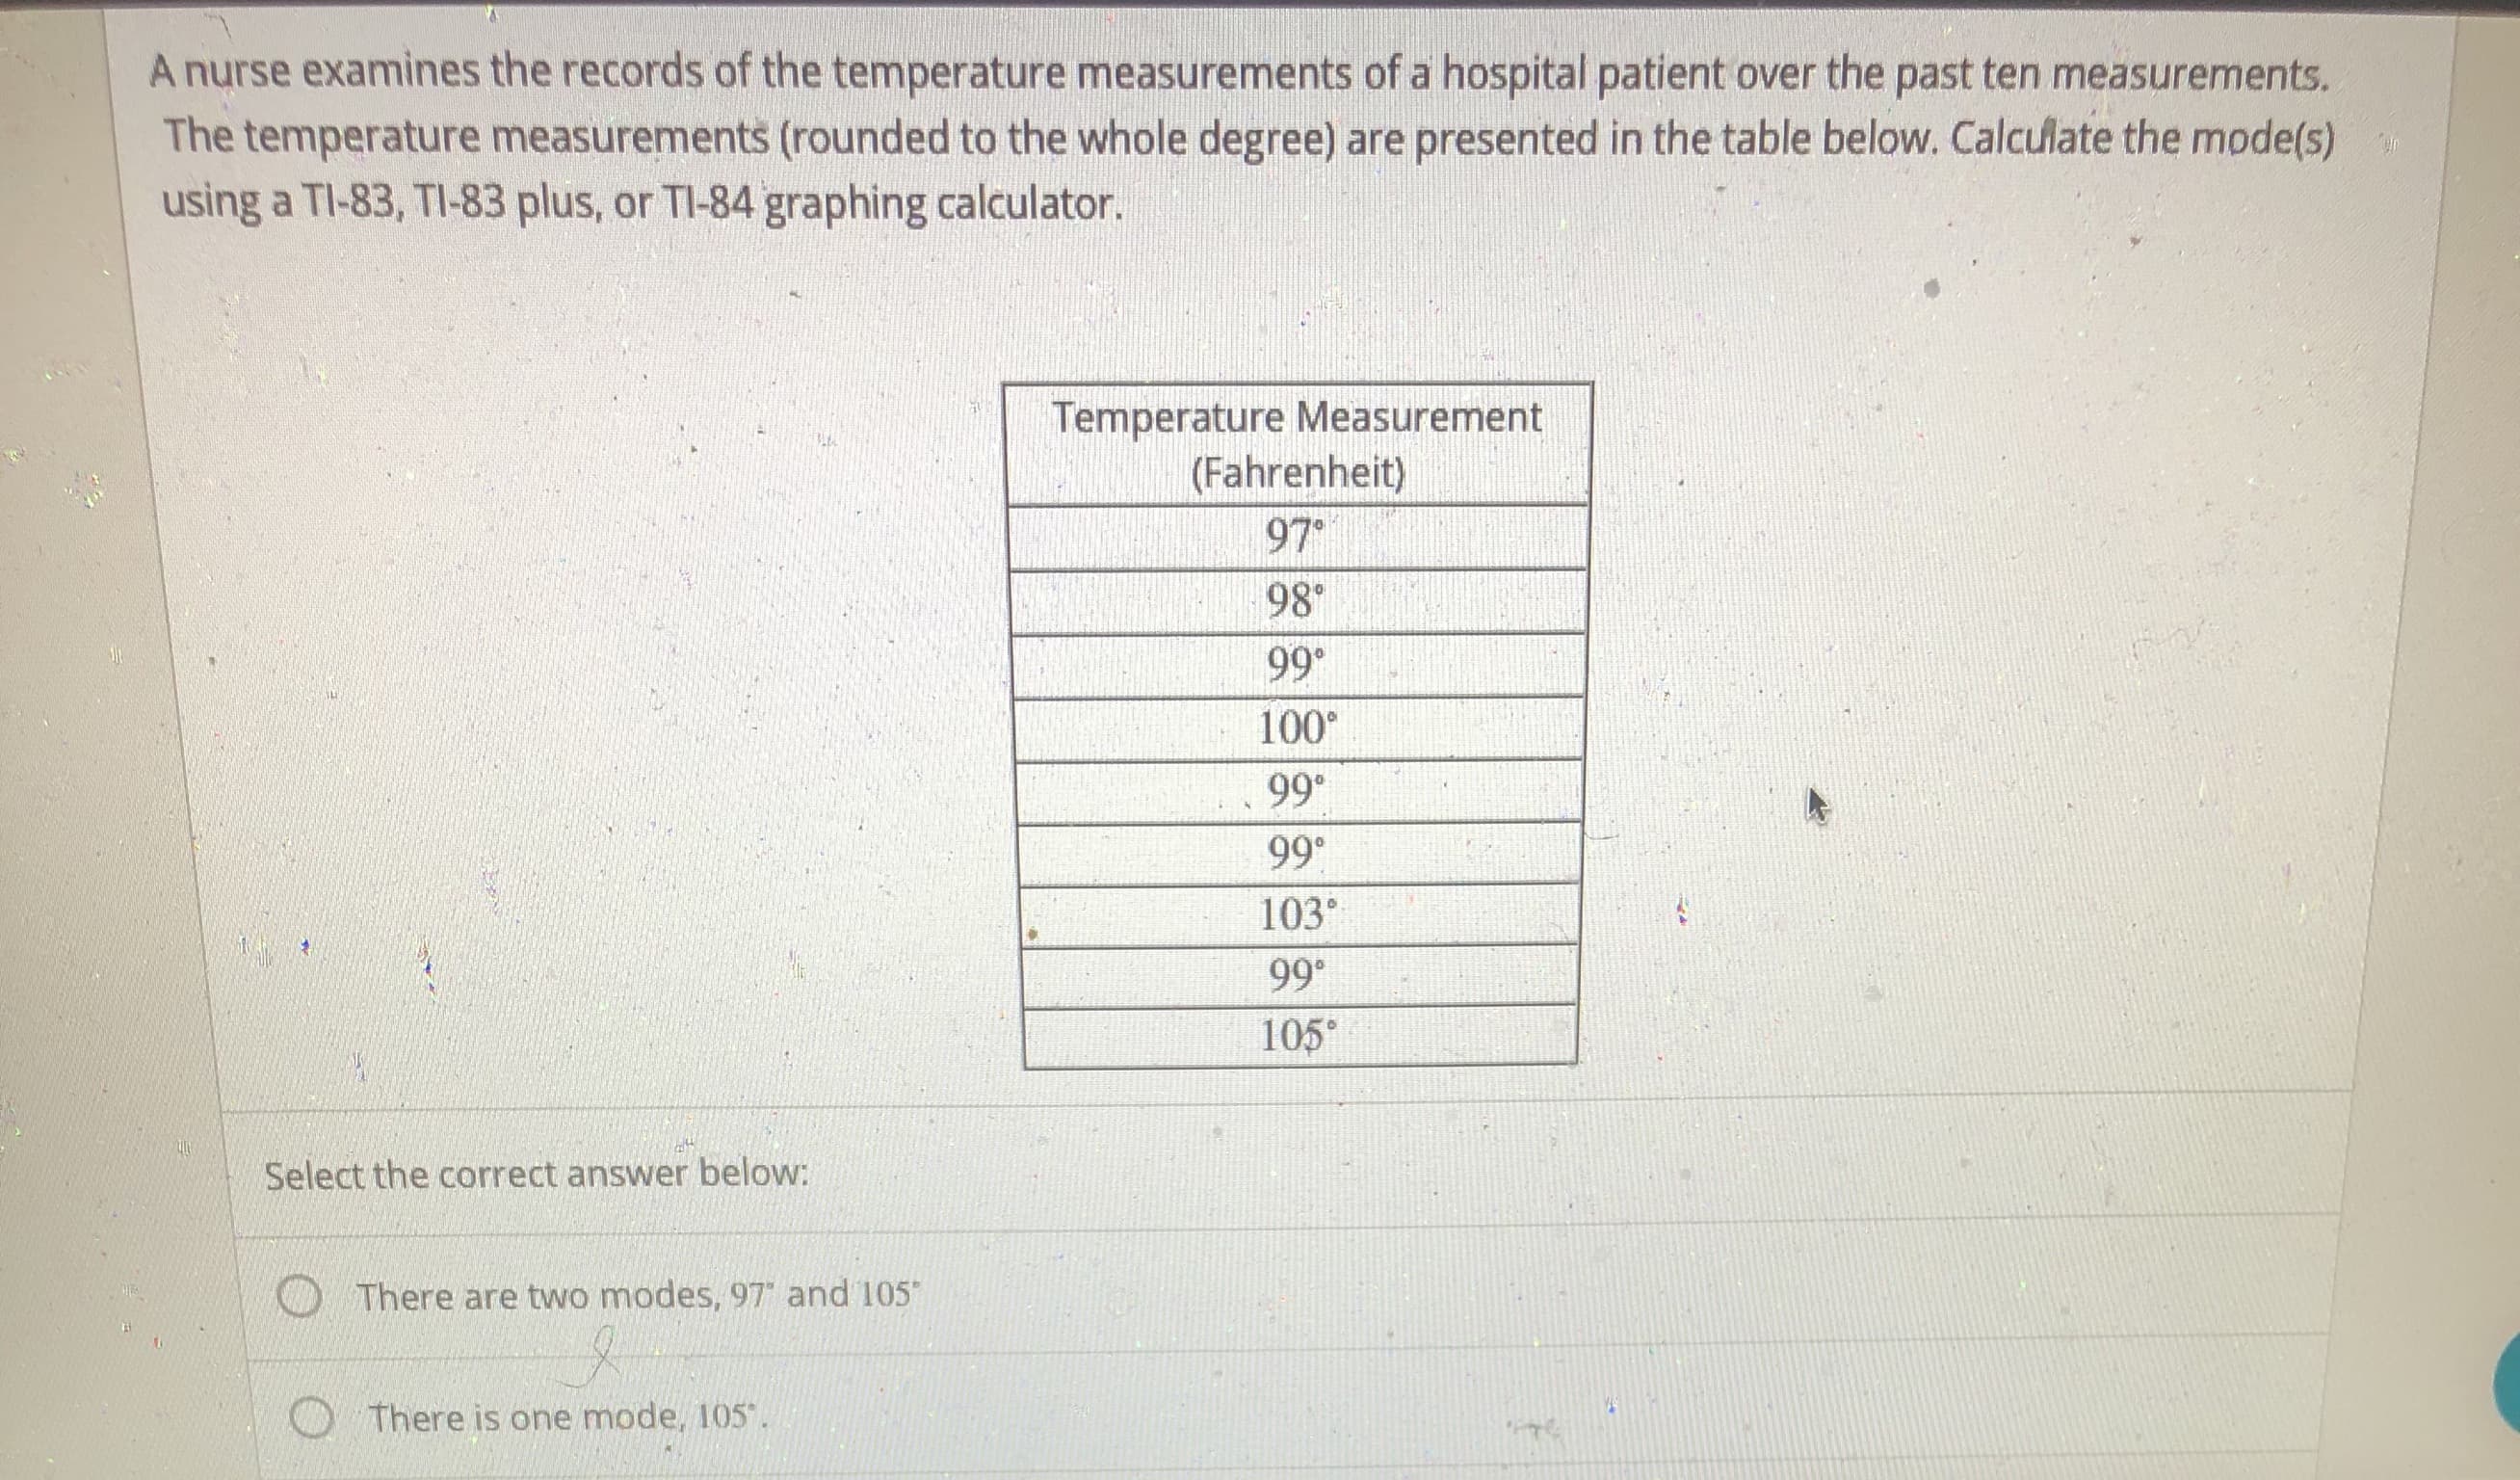 A nurse examines the records of the temperature measurements of a hospital patient over the past ten measurements.
The temperature measurements (rounded to the whole degree) are presented in the table below. Calculate the mode(s)
using a TI-83, TI-83 plus, or TI-84 graphing calculator.
